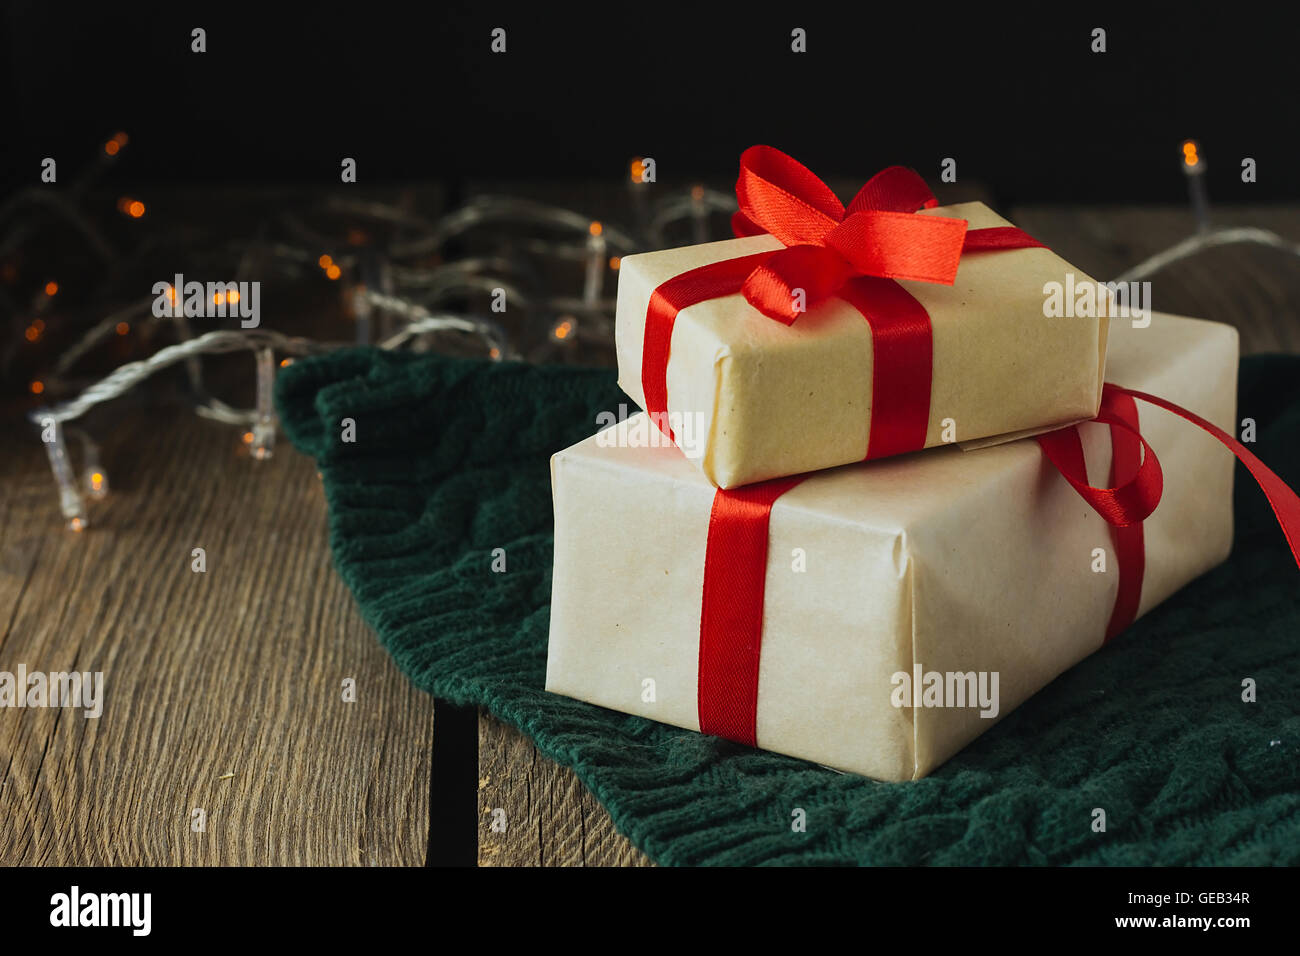 Christmas presents on green woolen pullover selective focus Stock Photo